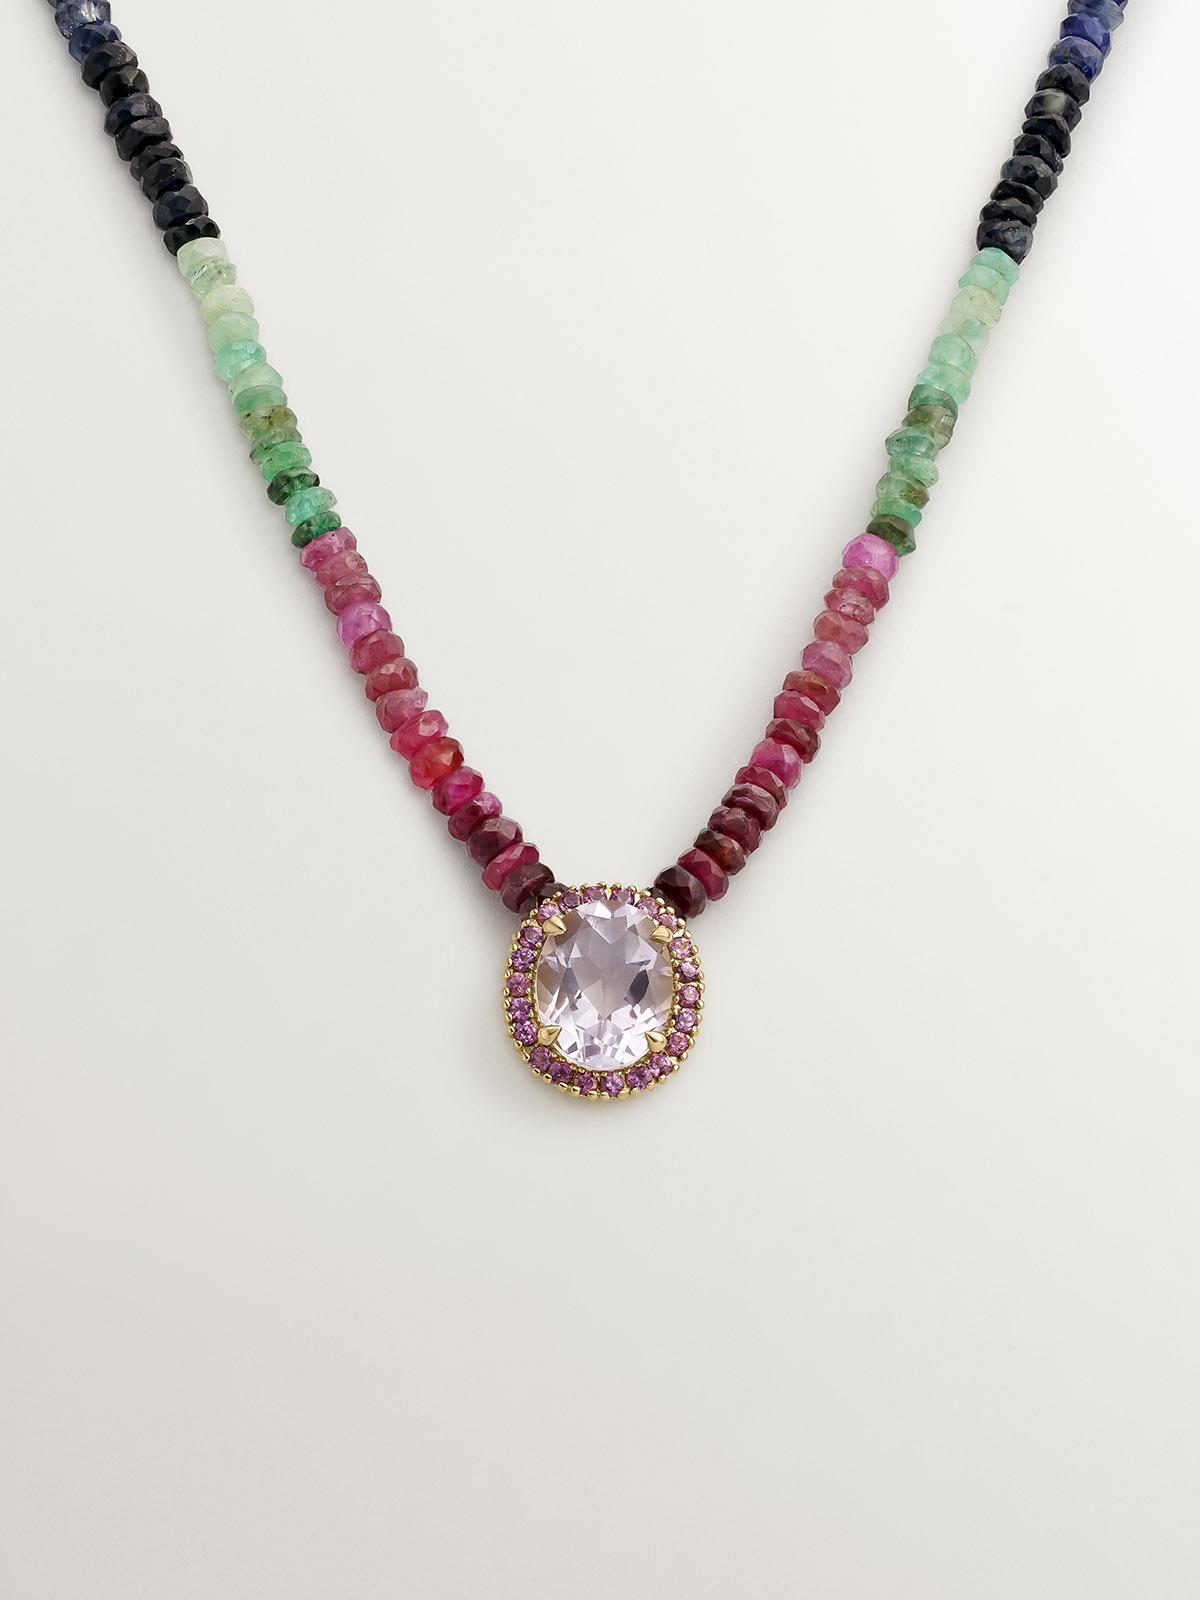 925 silver necklace bathed in 18K yellow gold with multicolor sapphires, pink rhodolite, and purple amethyst.